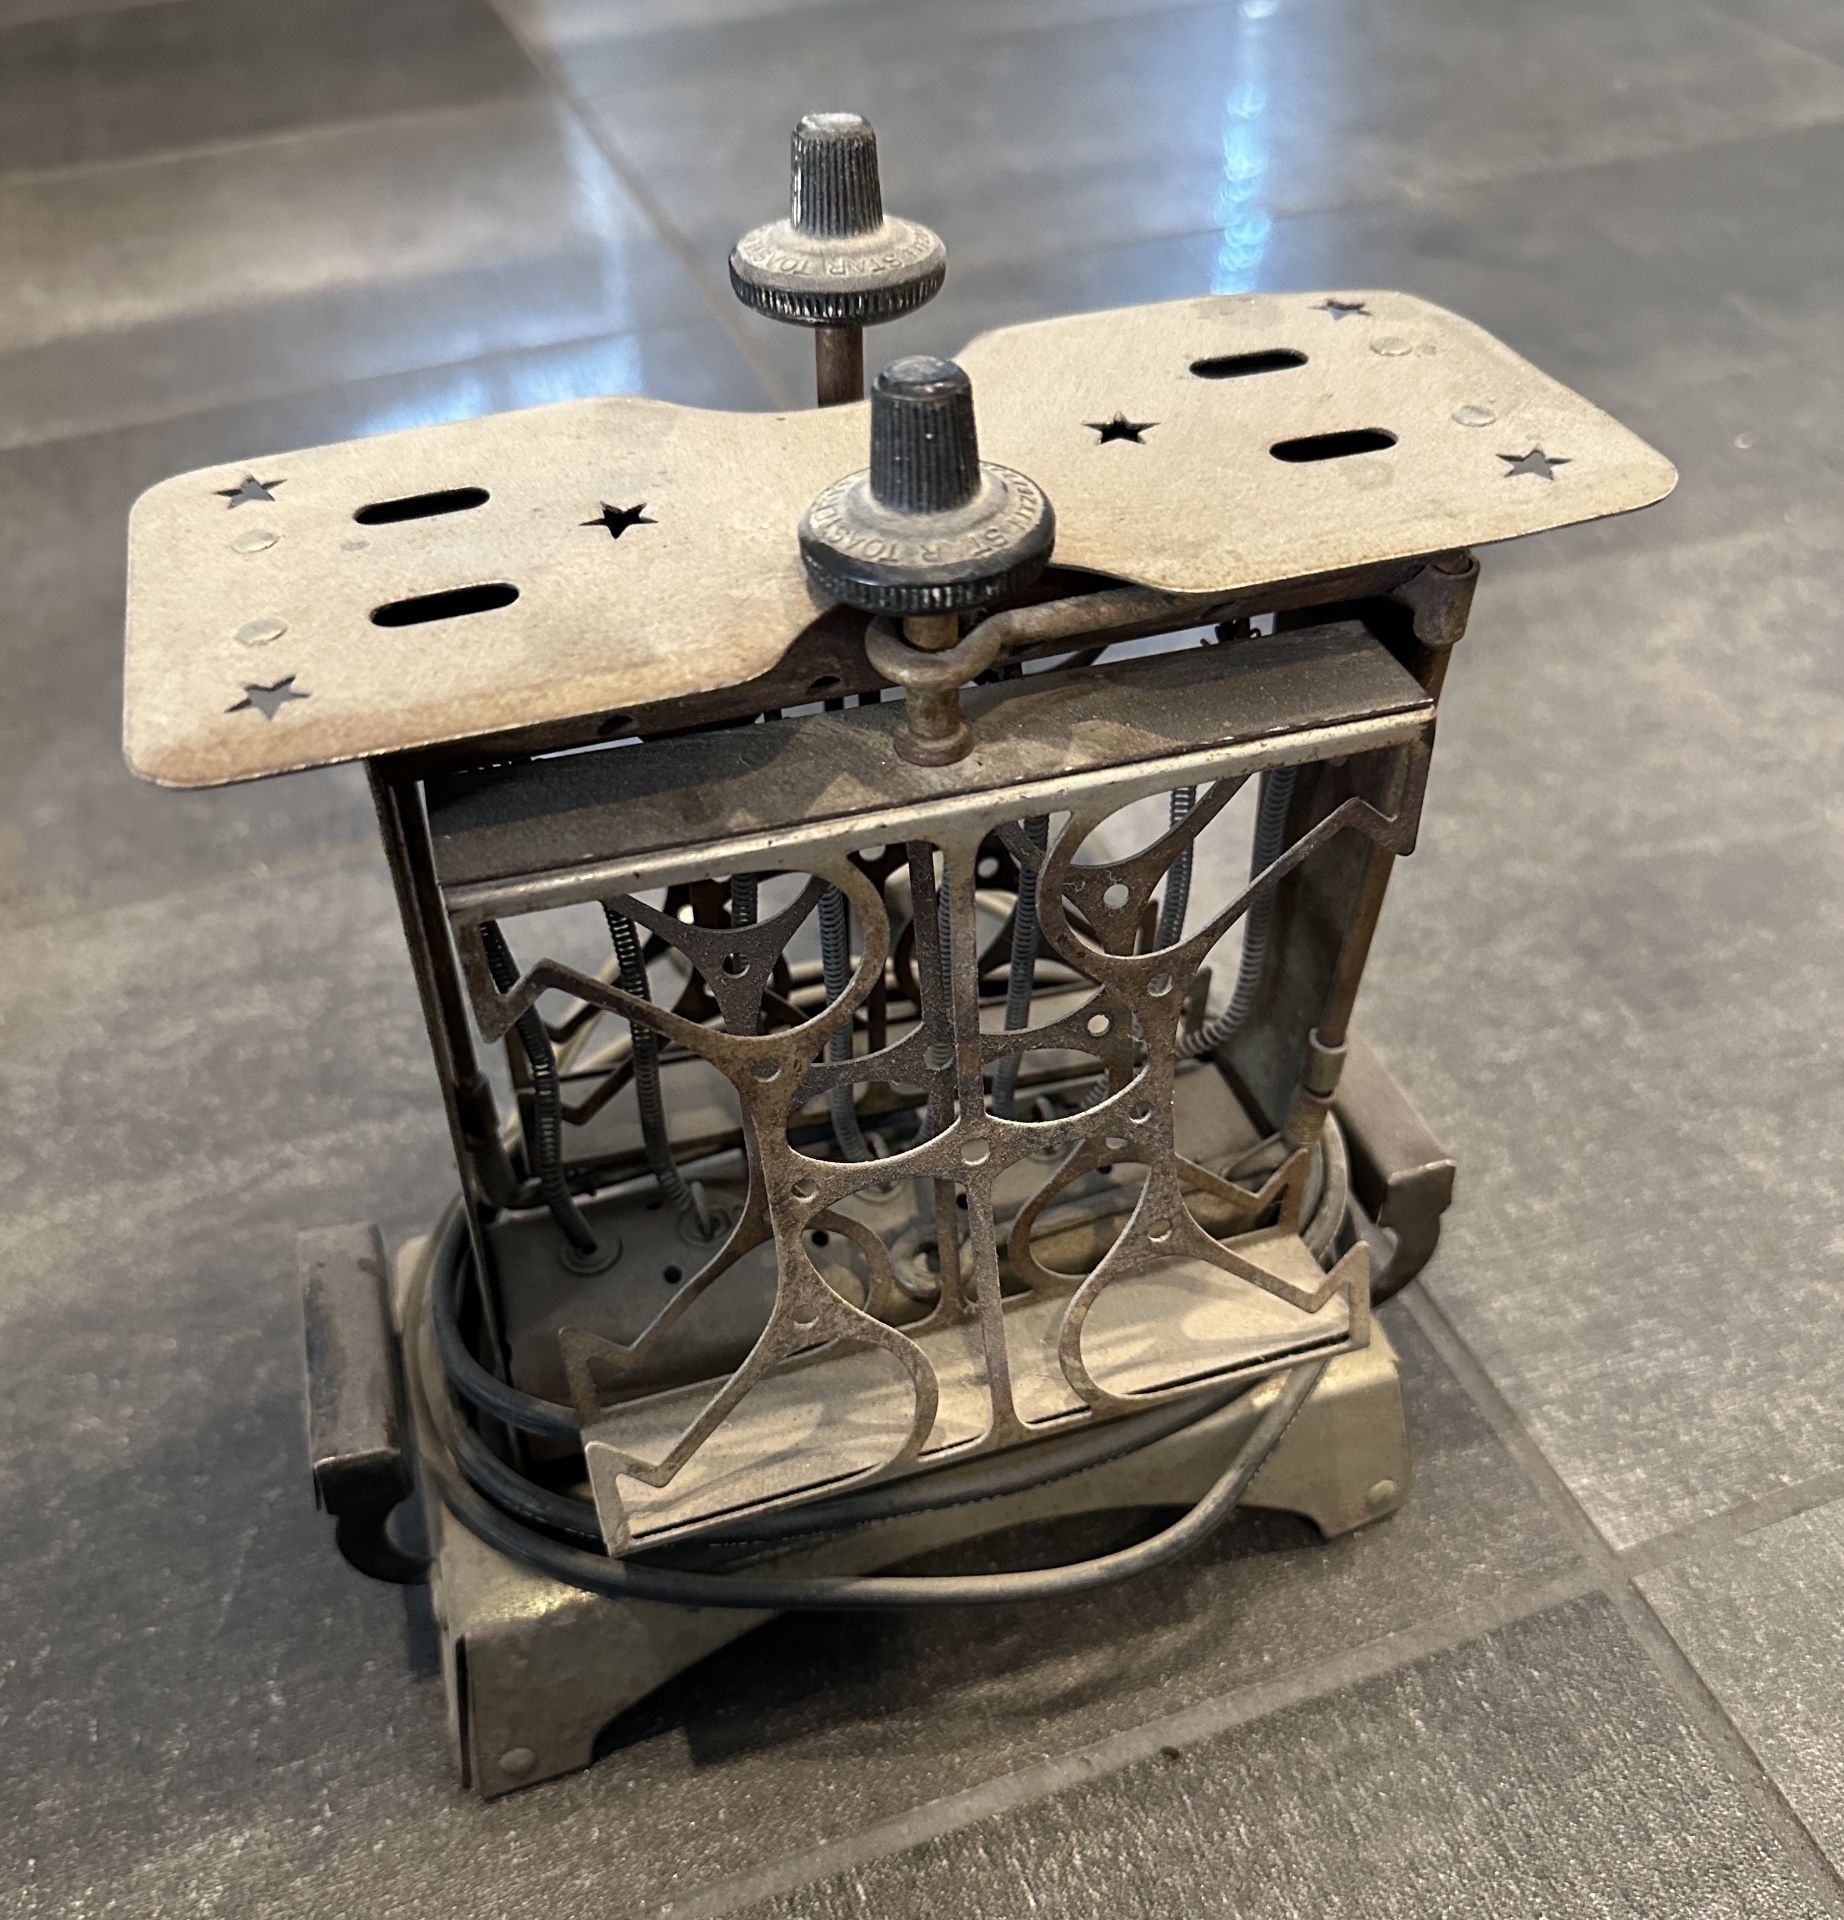 VERY OLD VINTAGE TOASTER , ONE OF THE FIRST EVER INVENTED - Image 2 of 2